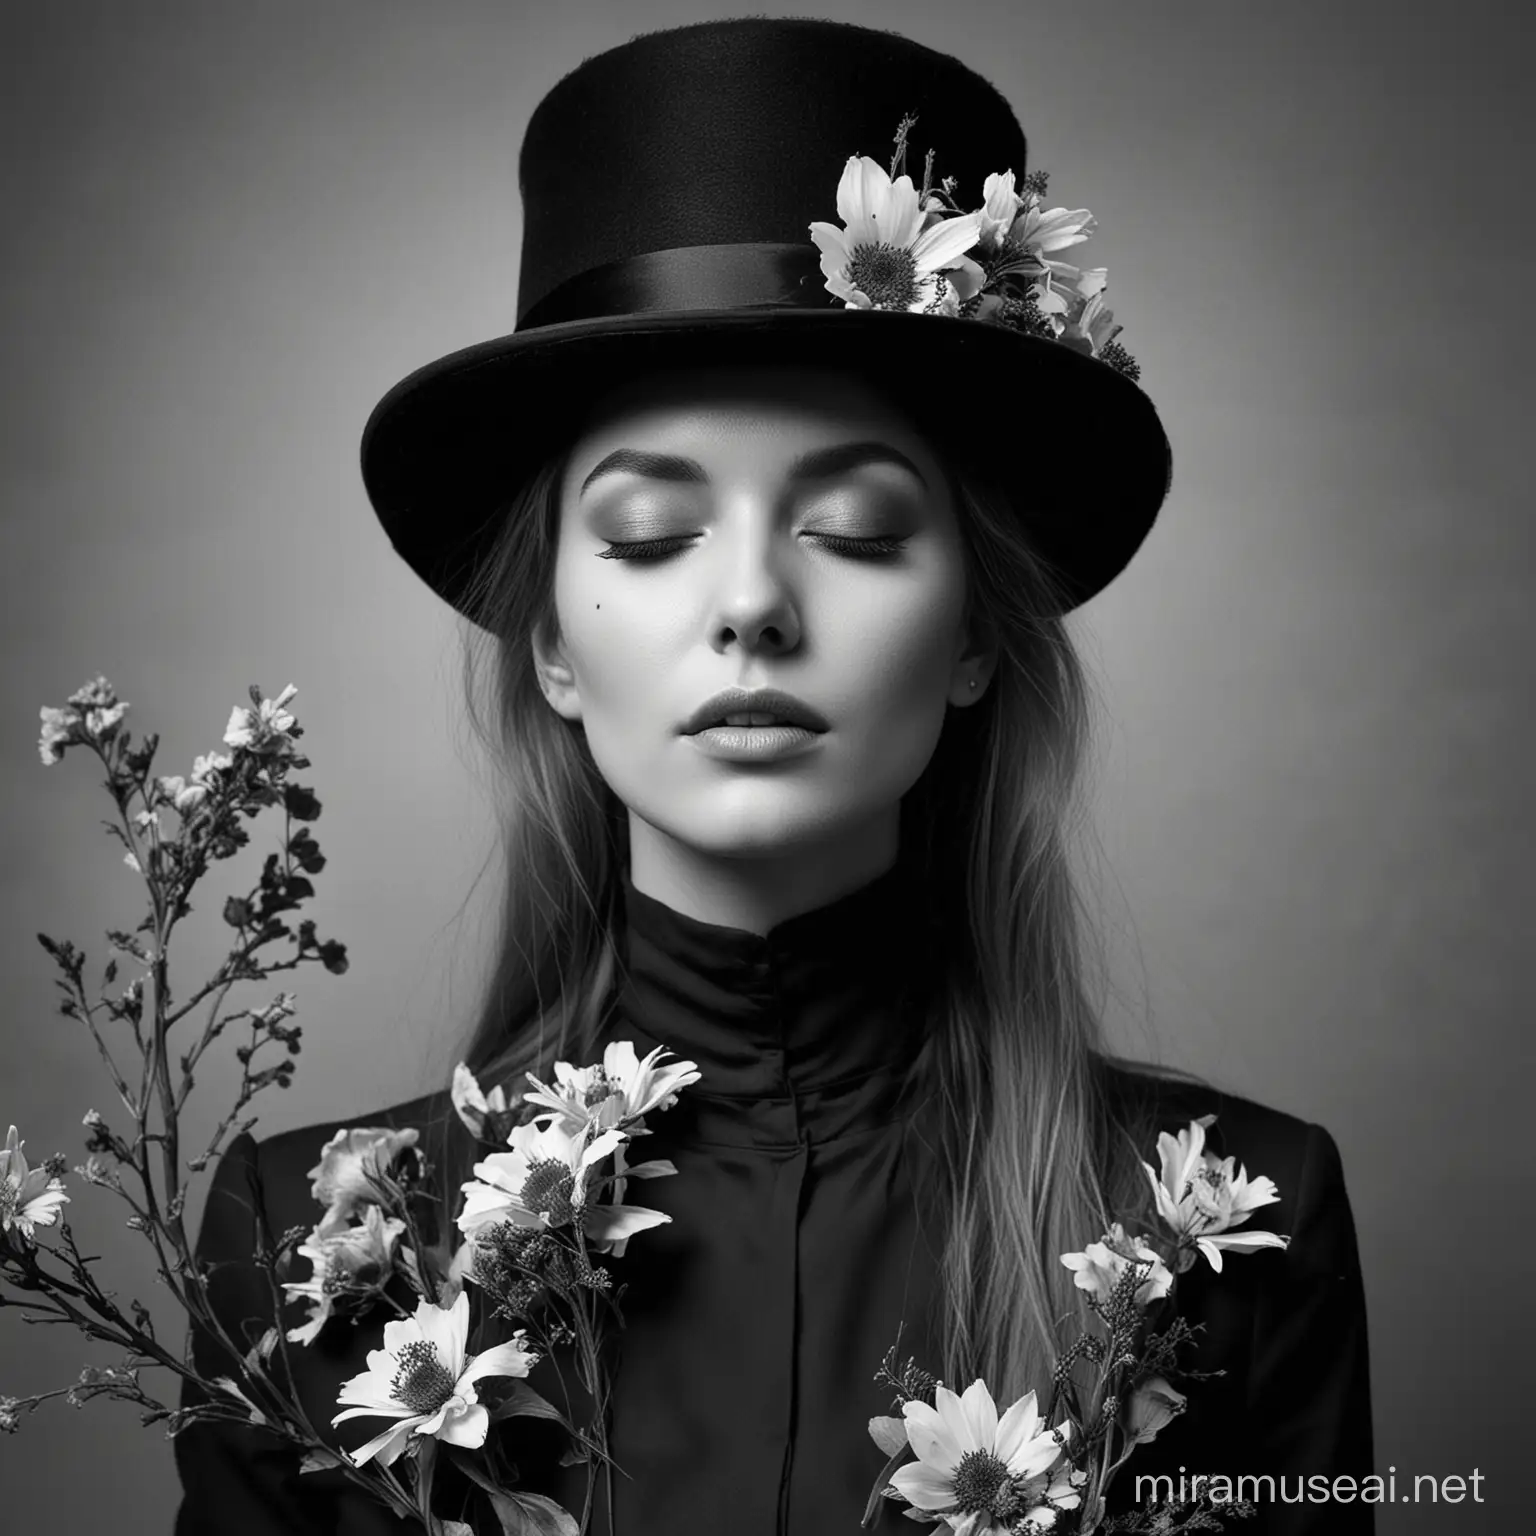 black and white photo of a fashion model with closed eyes and a top hat with some dead flowers on it

